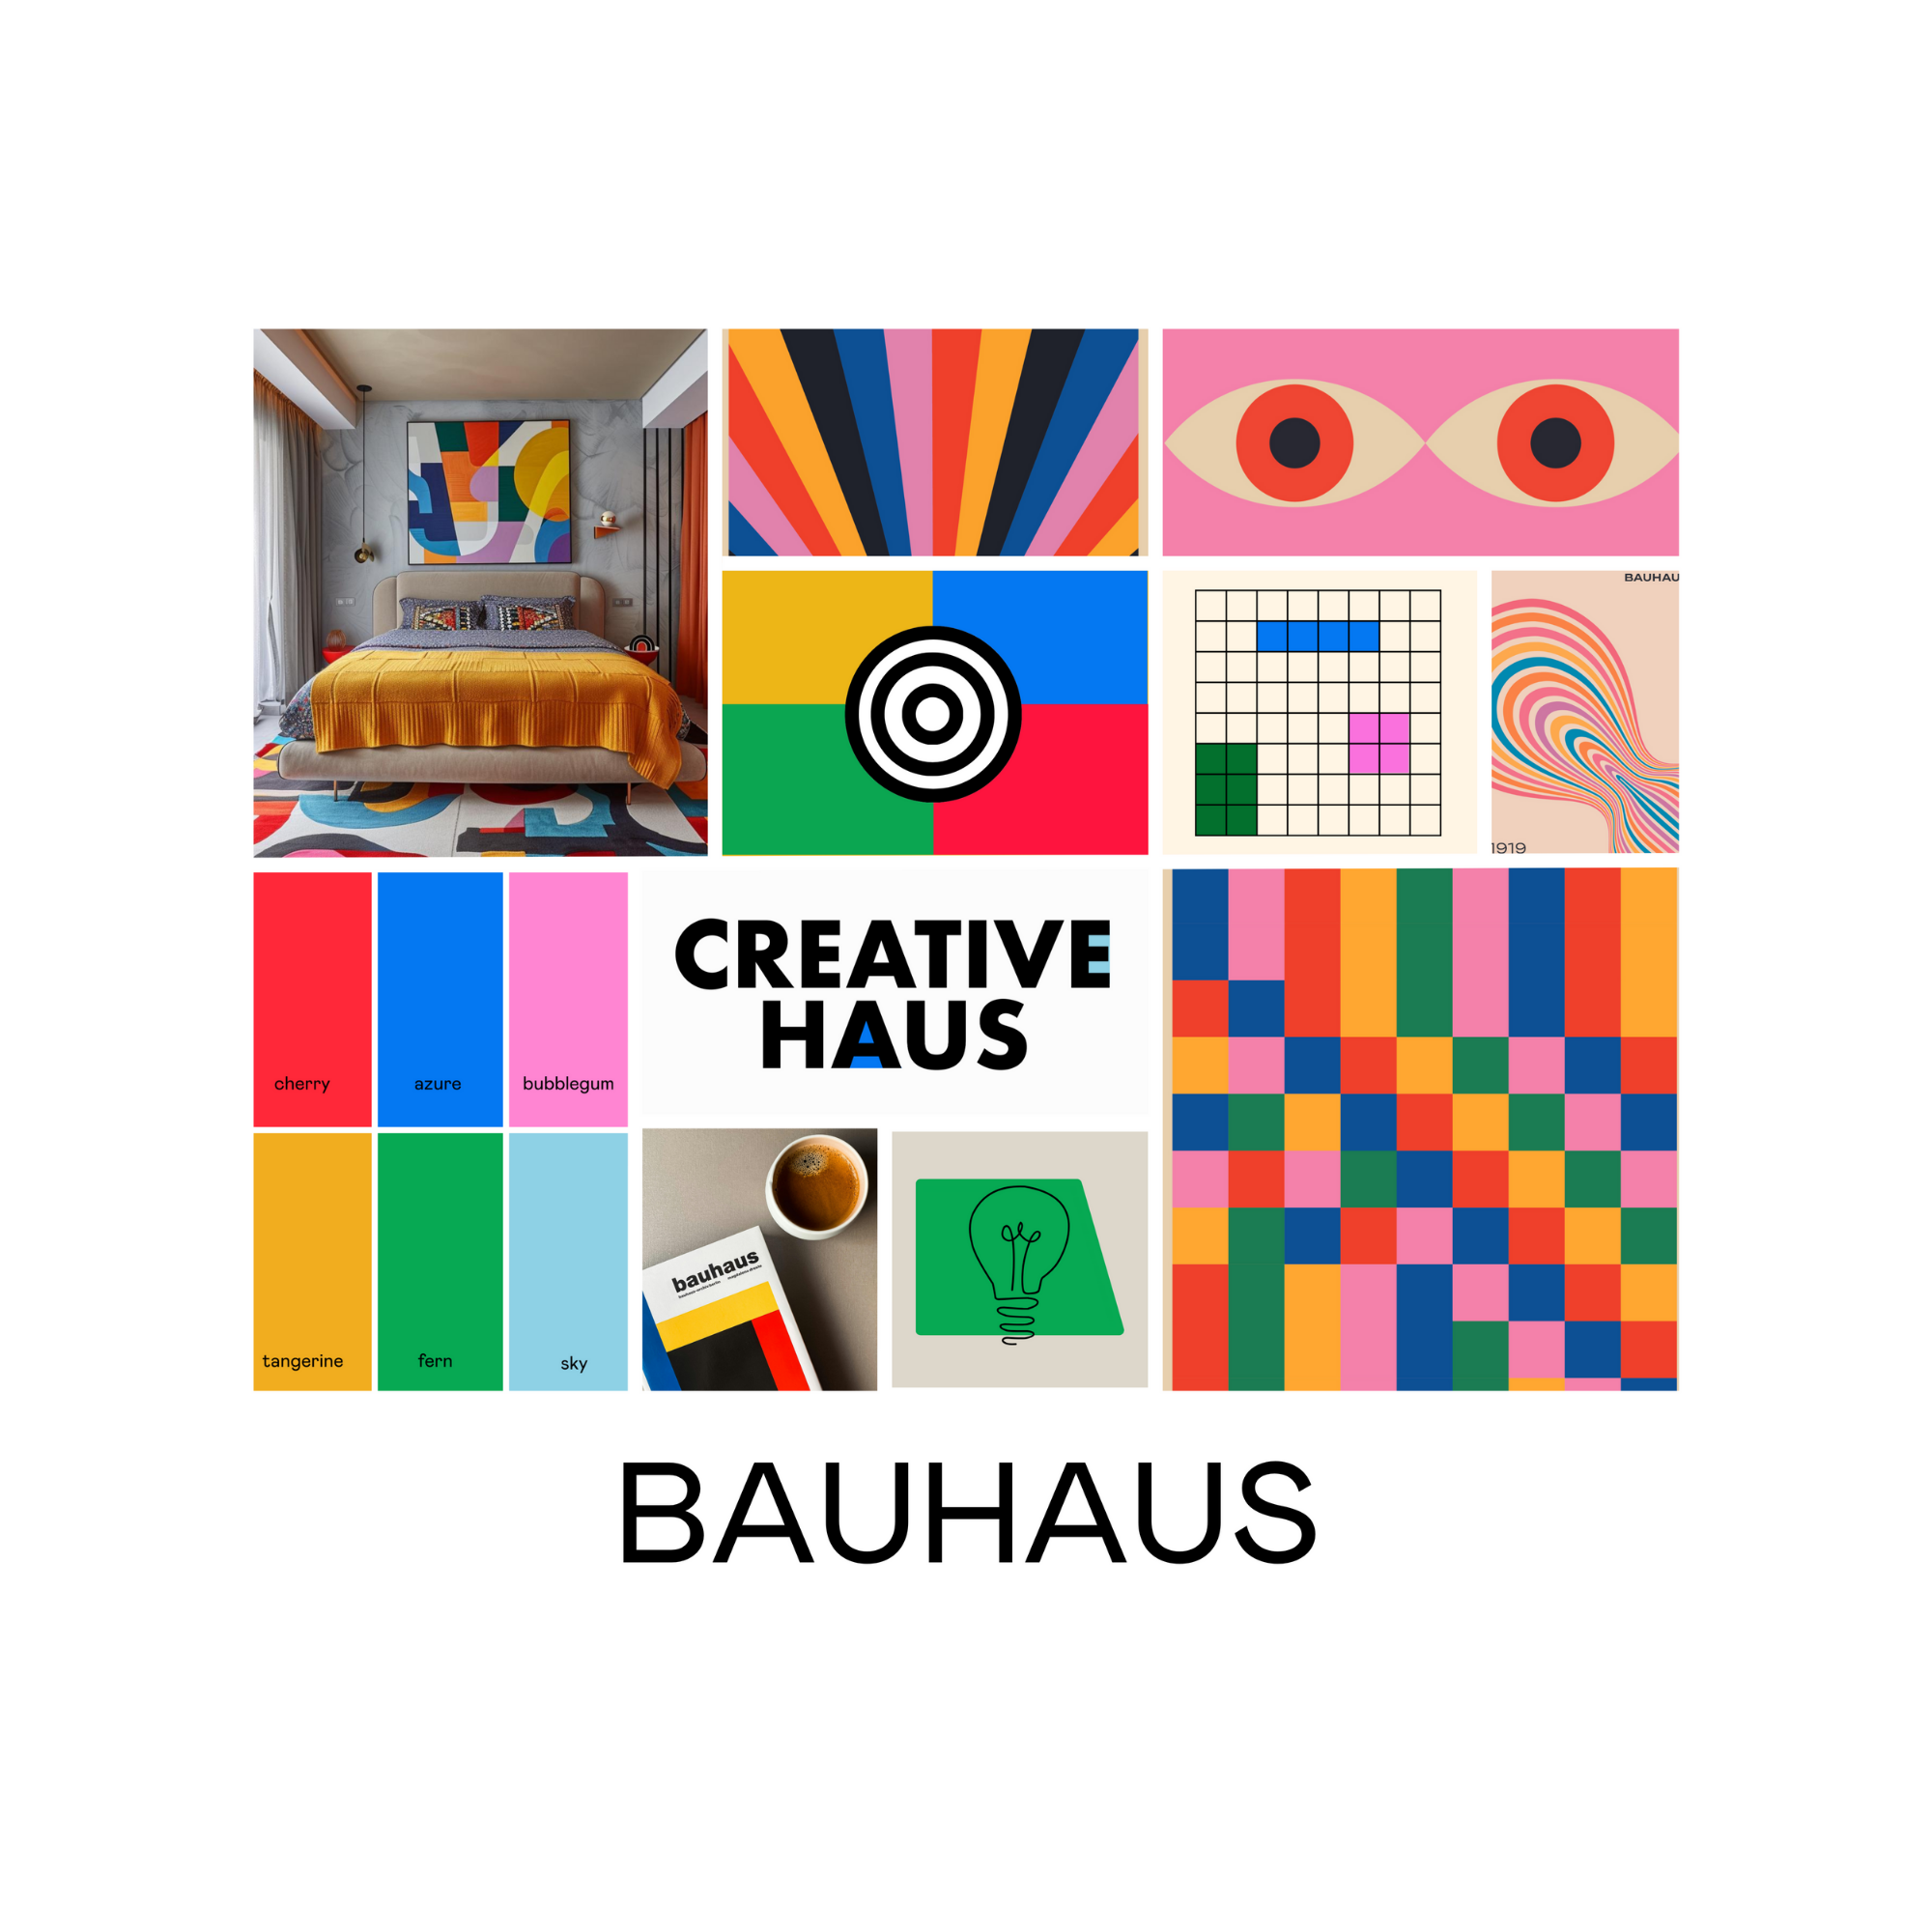 A mood board of the 'Bauhaus' design style: lots of bold colors, simple shapes, and saturated primary colors (red, blue, pink, yellow, green)